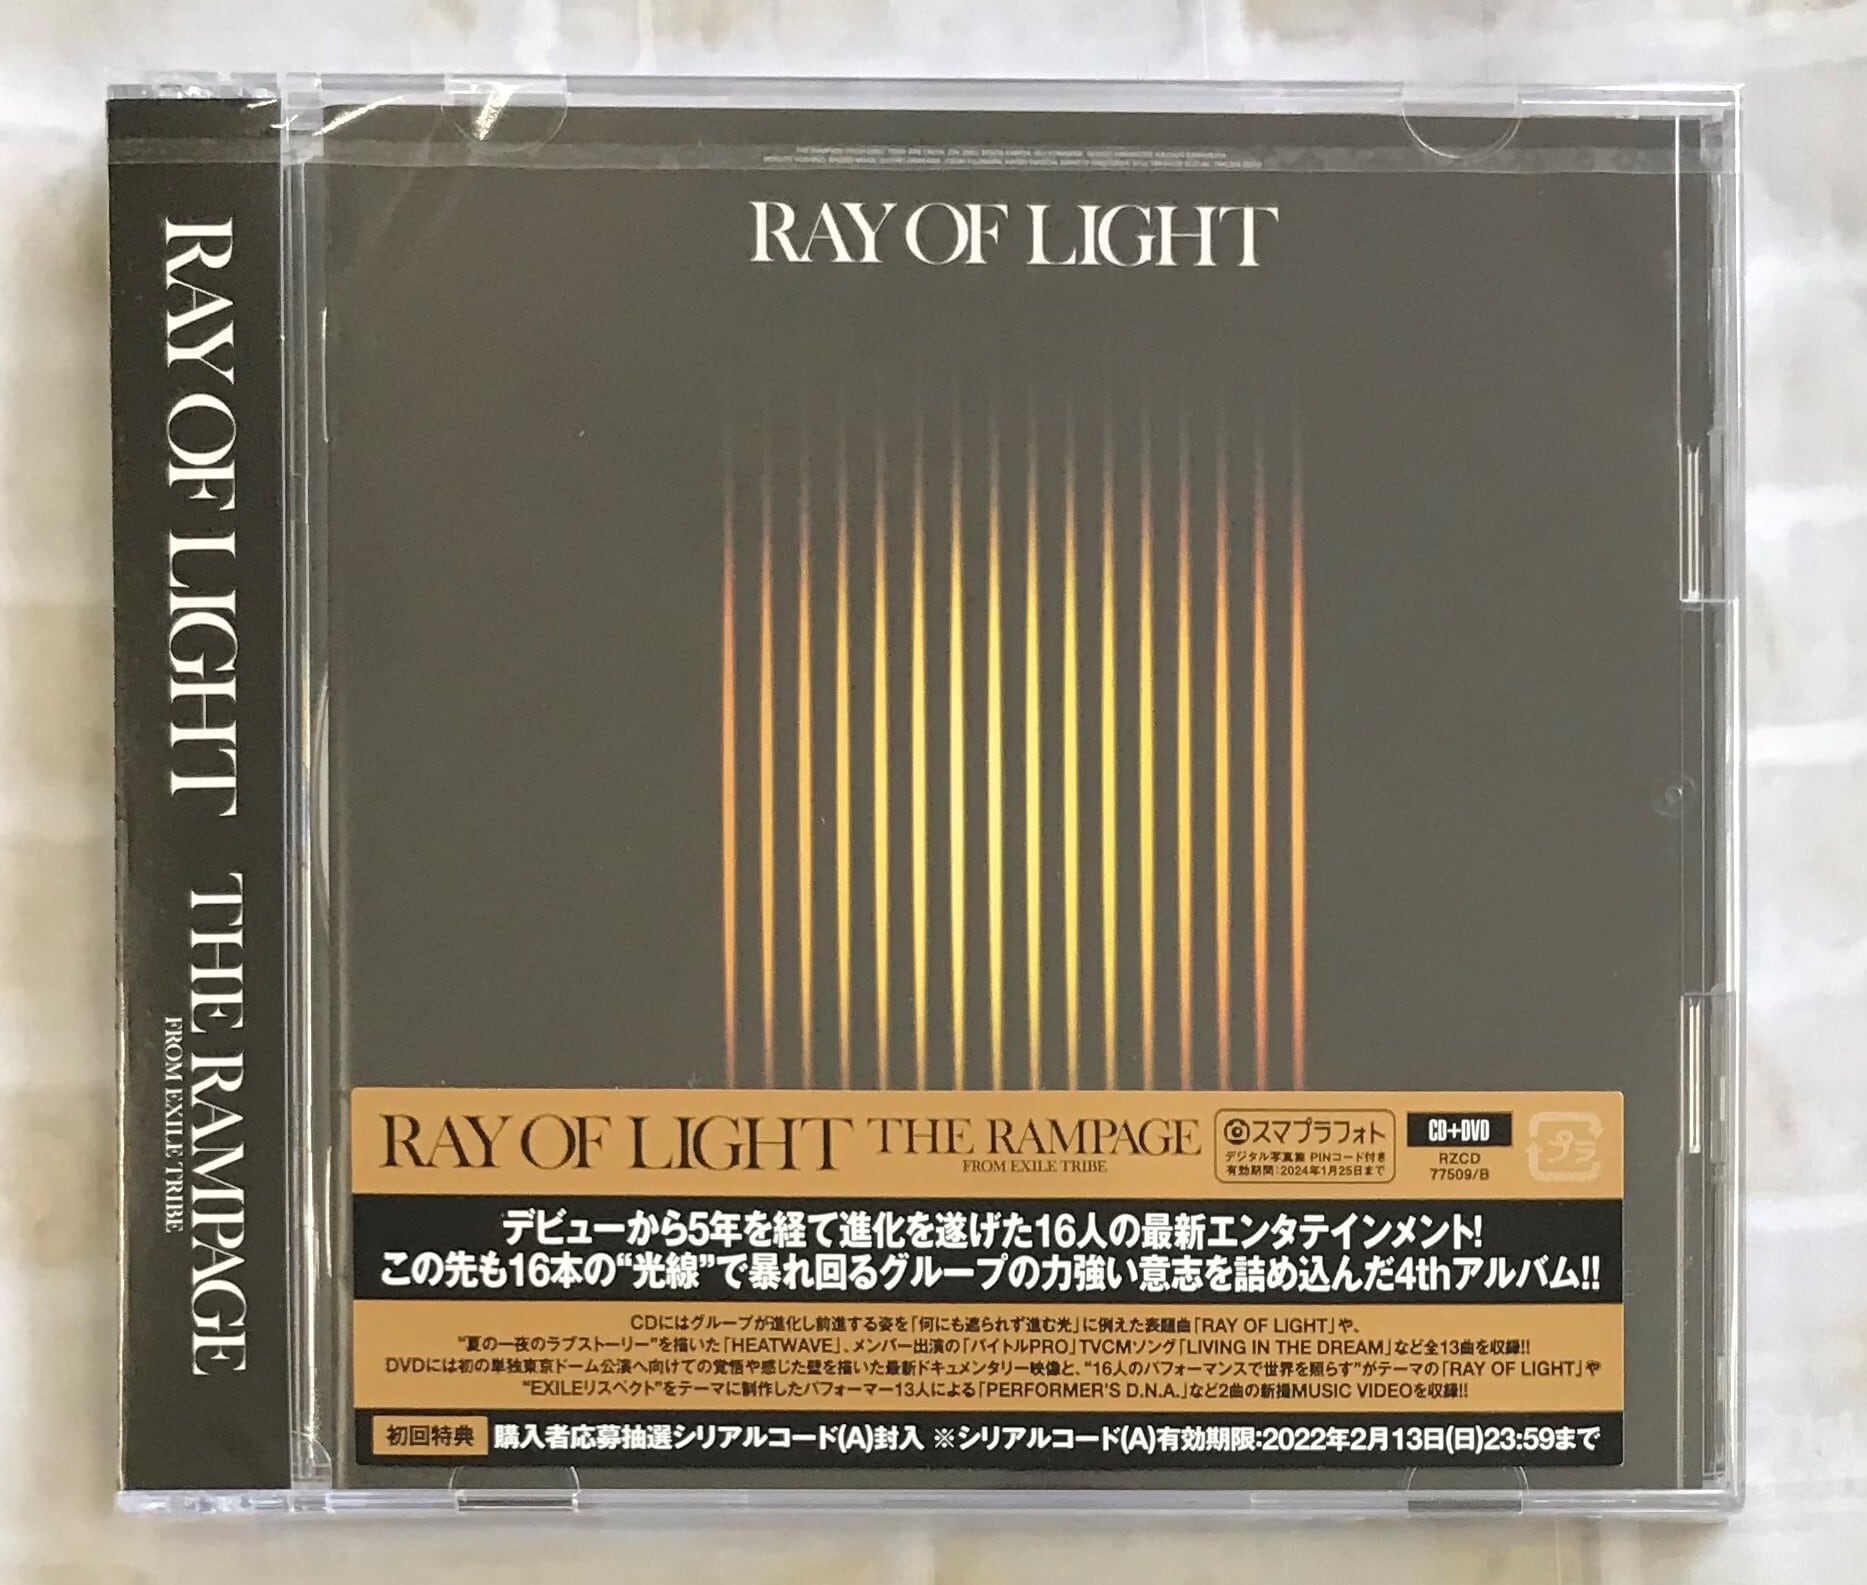 THE RAMPAGE 4th アルバム RAY OF LIGHT初回限定盤